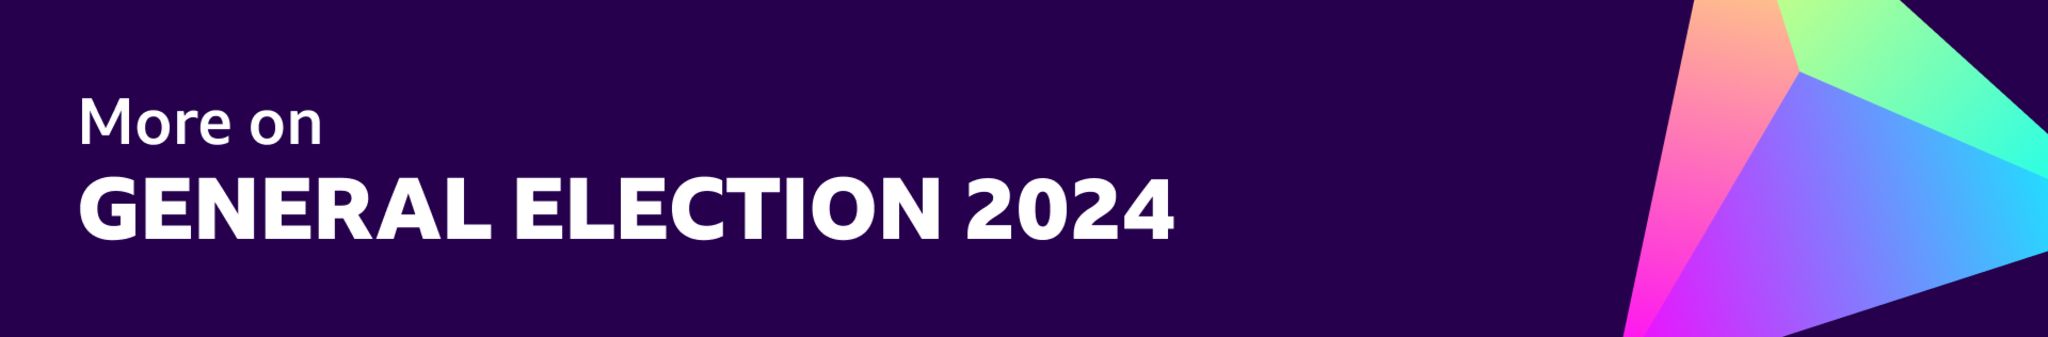 A purple bar showing the words More on General Election 2024